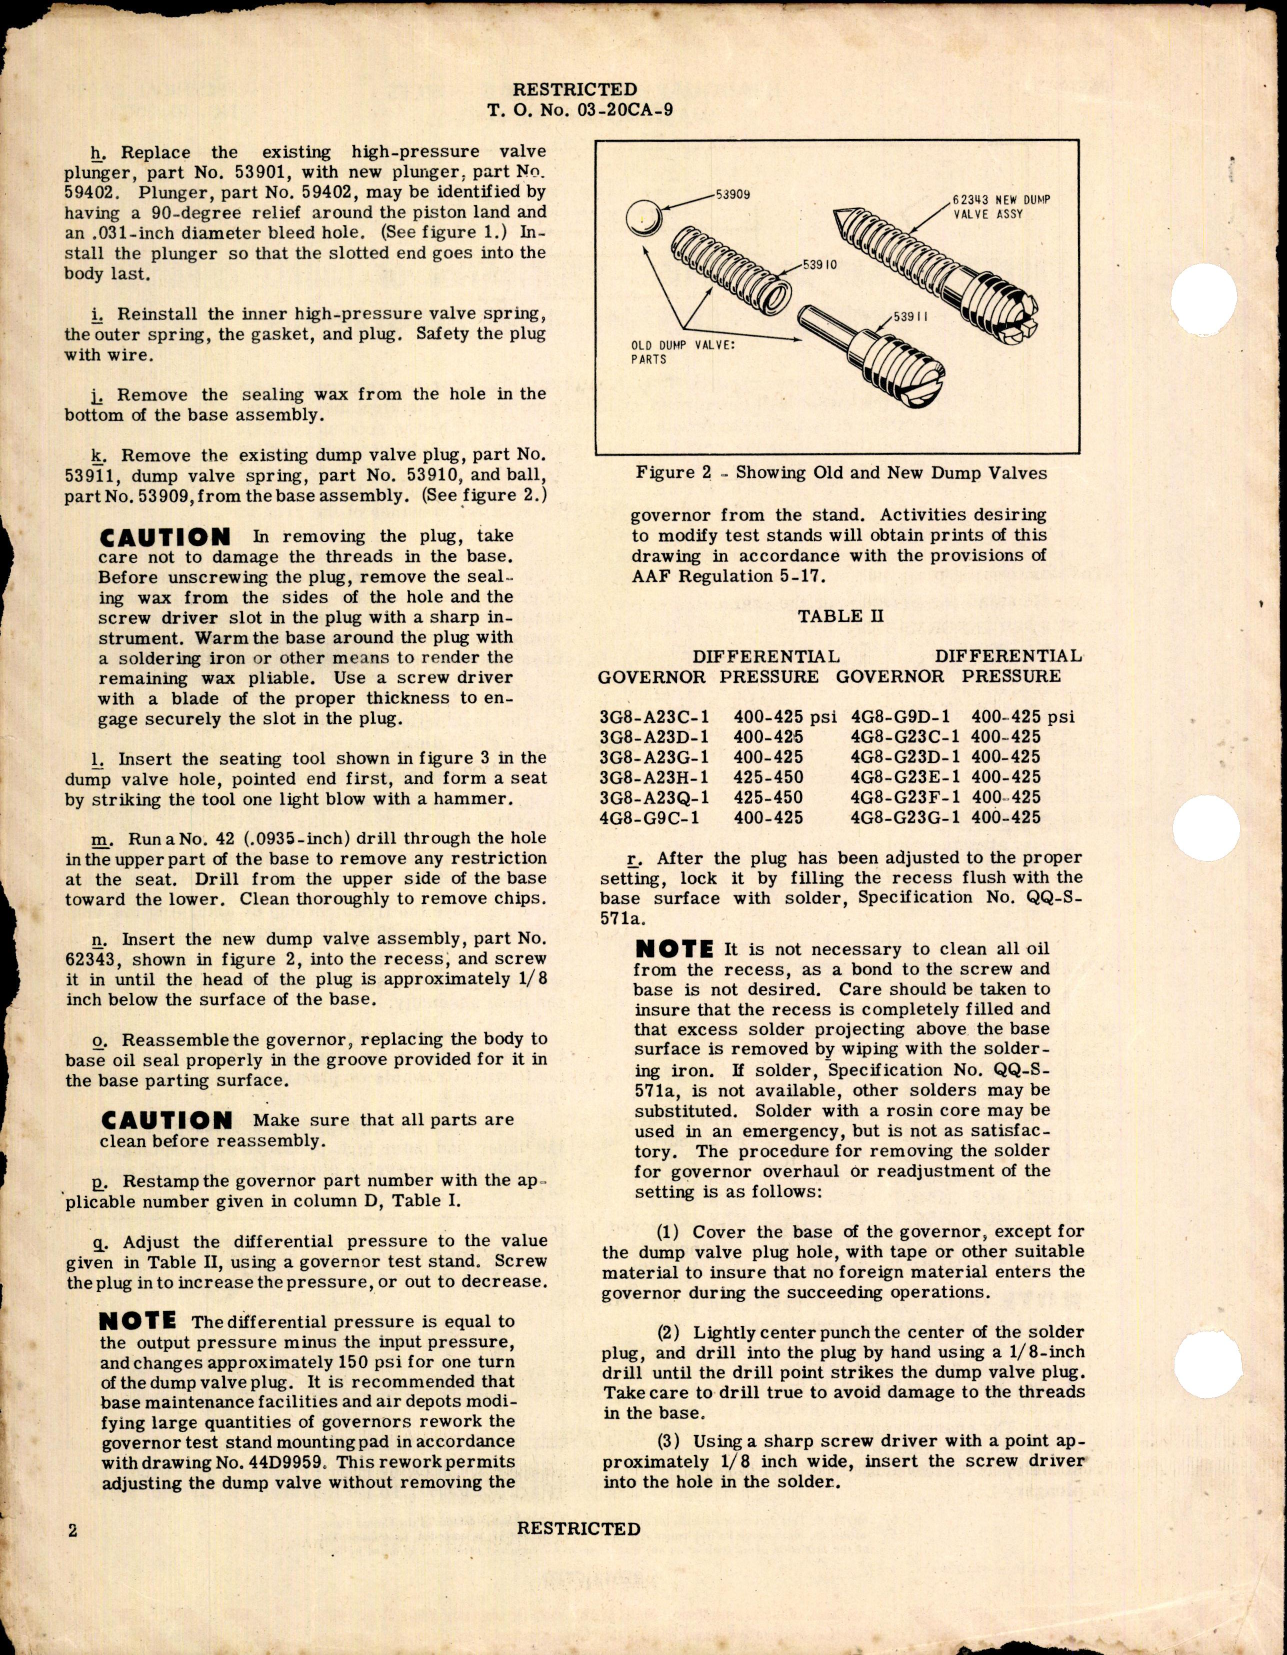 Sample page 2 from AirCorps Library document: Modification of Double Capacity Propeller Governors